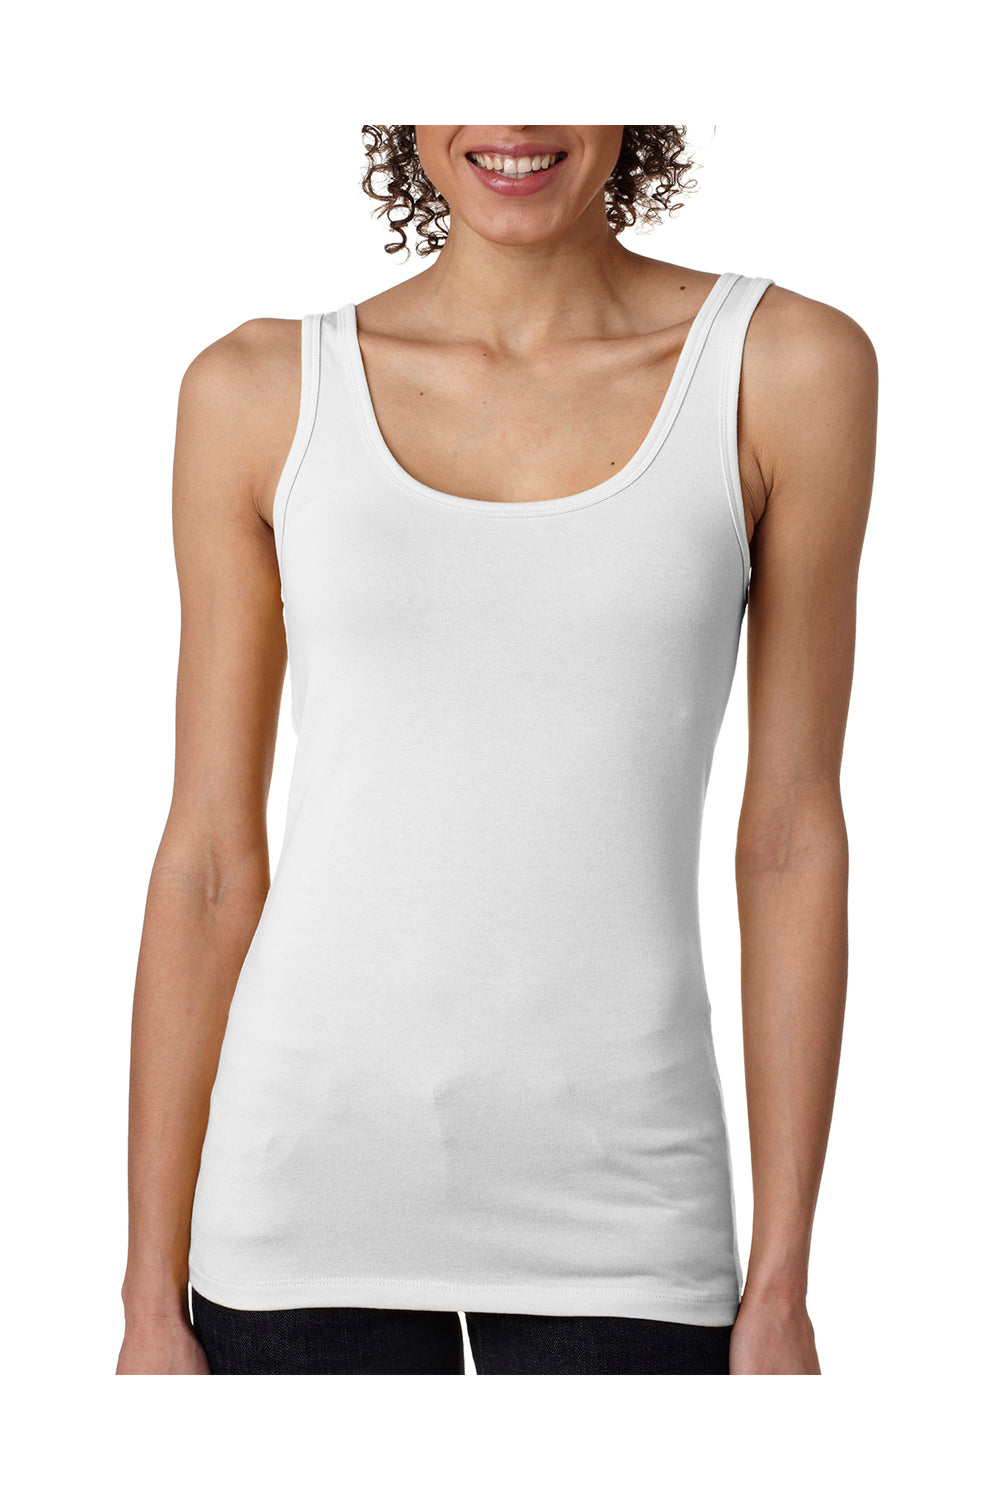 Next Level 3533 Womens Jersey Tank Top White Front